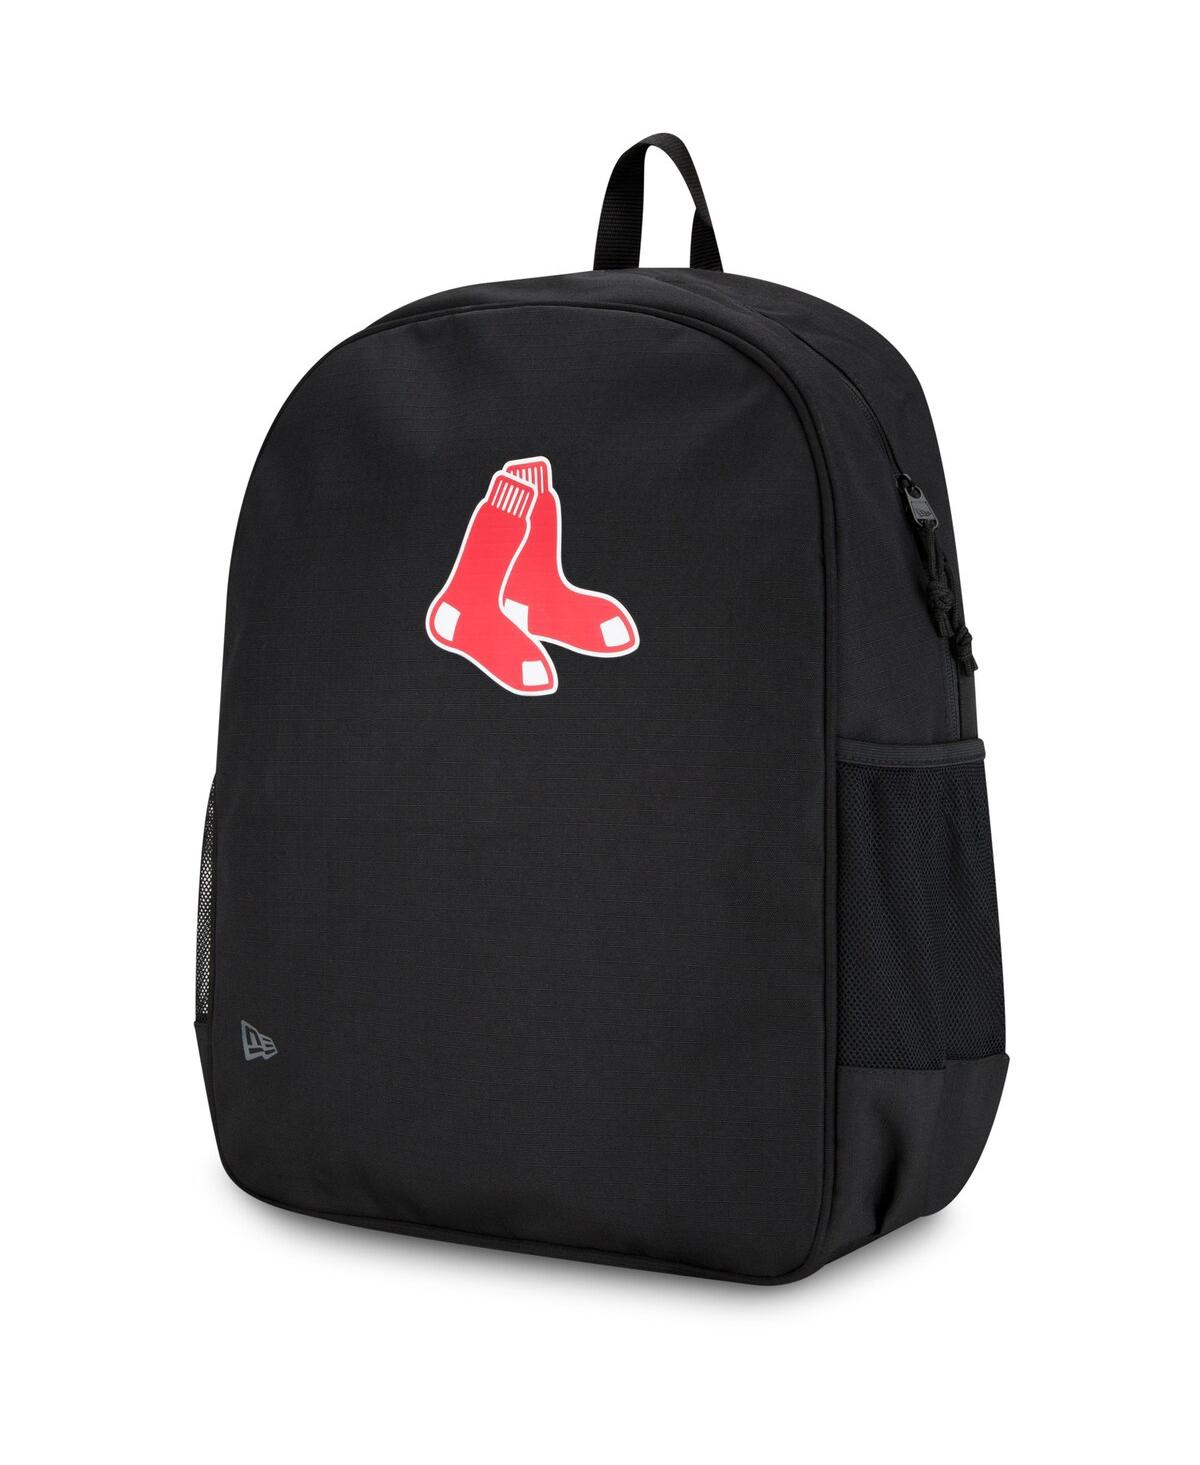 Men's and Women's New Era Boston Red Sox Trend Backpack - Black